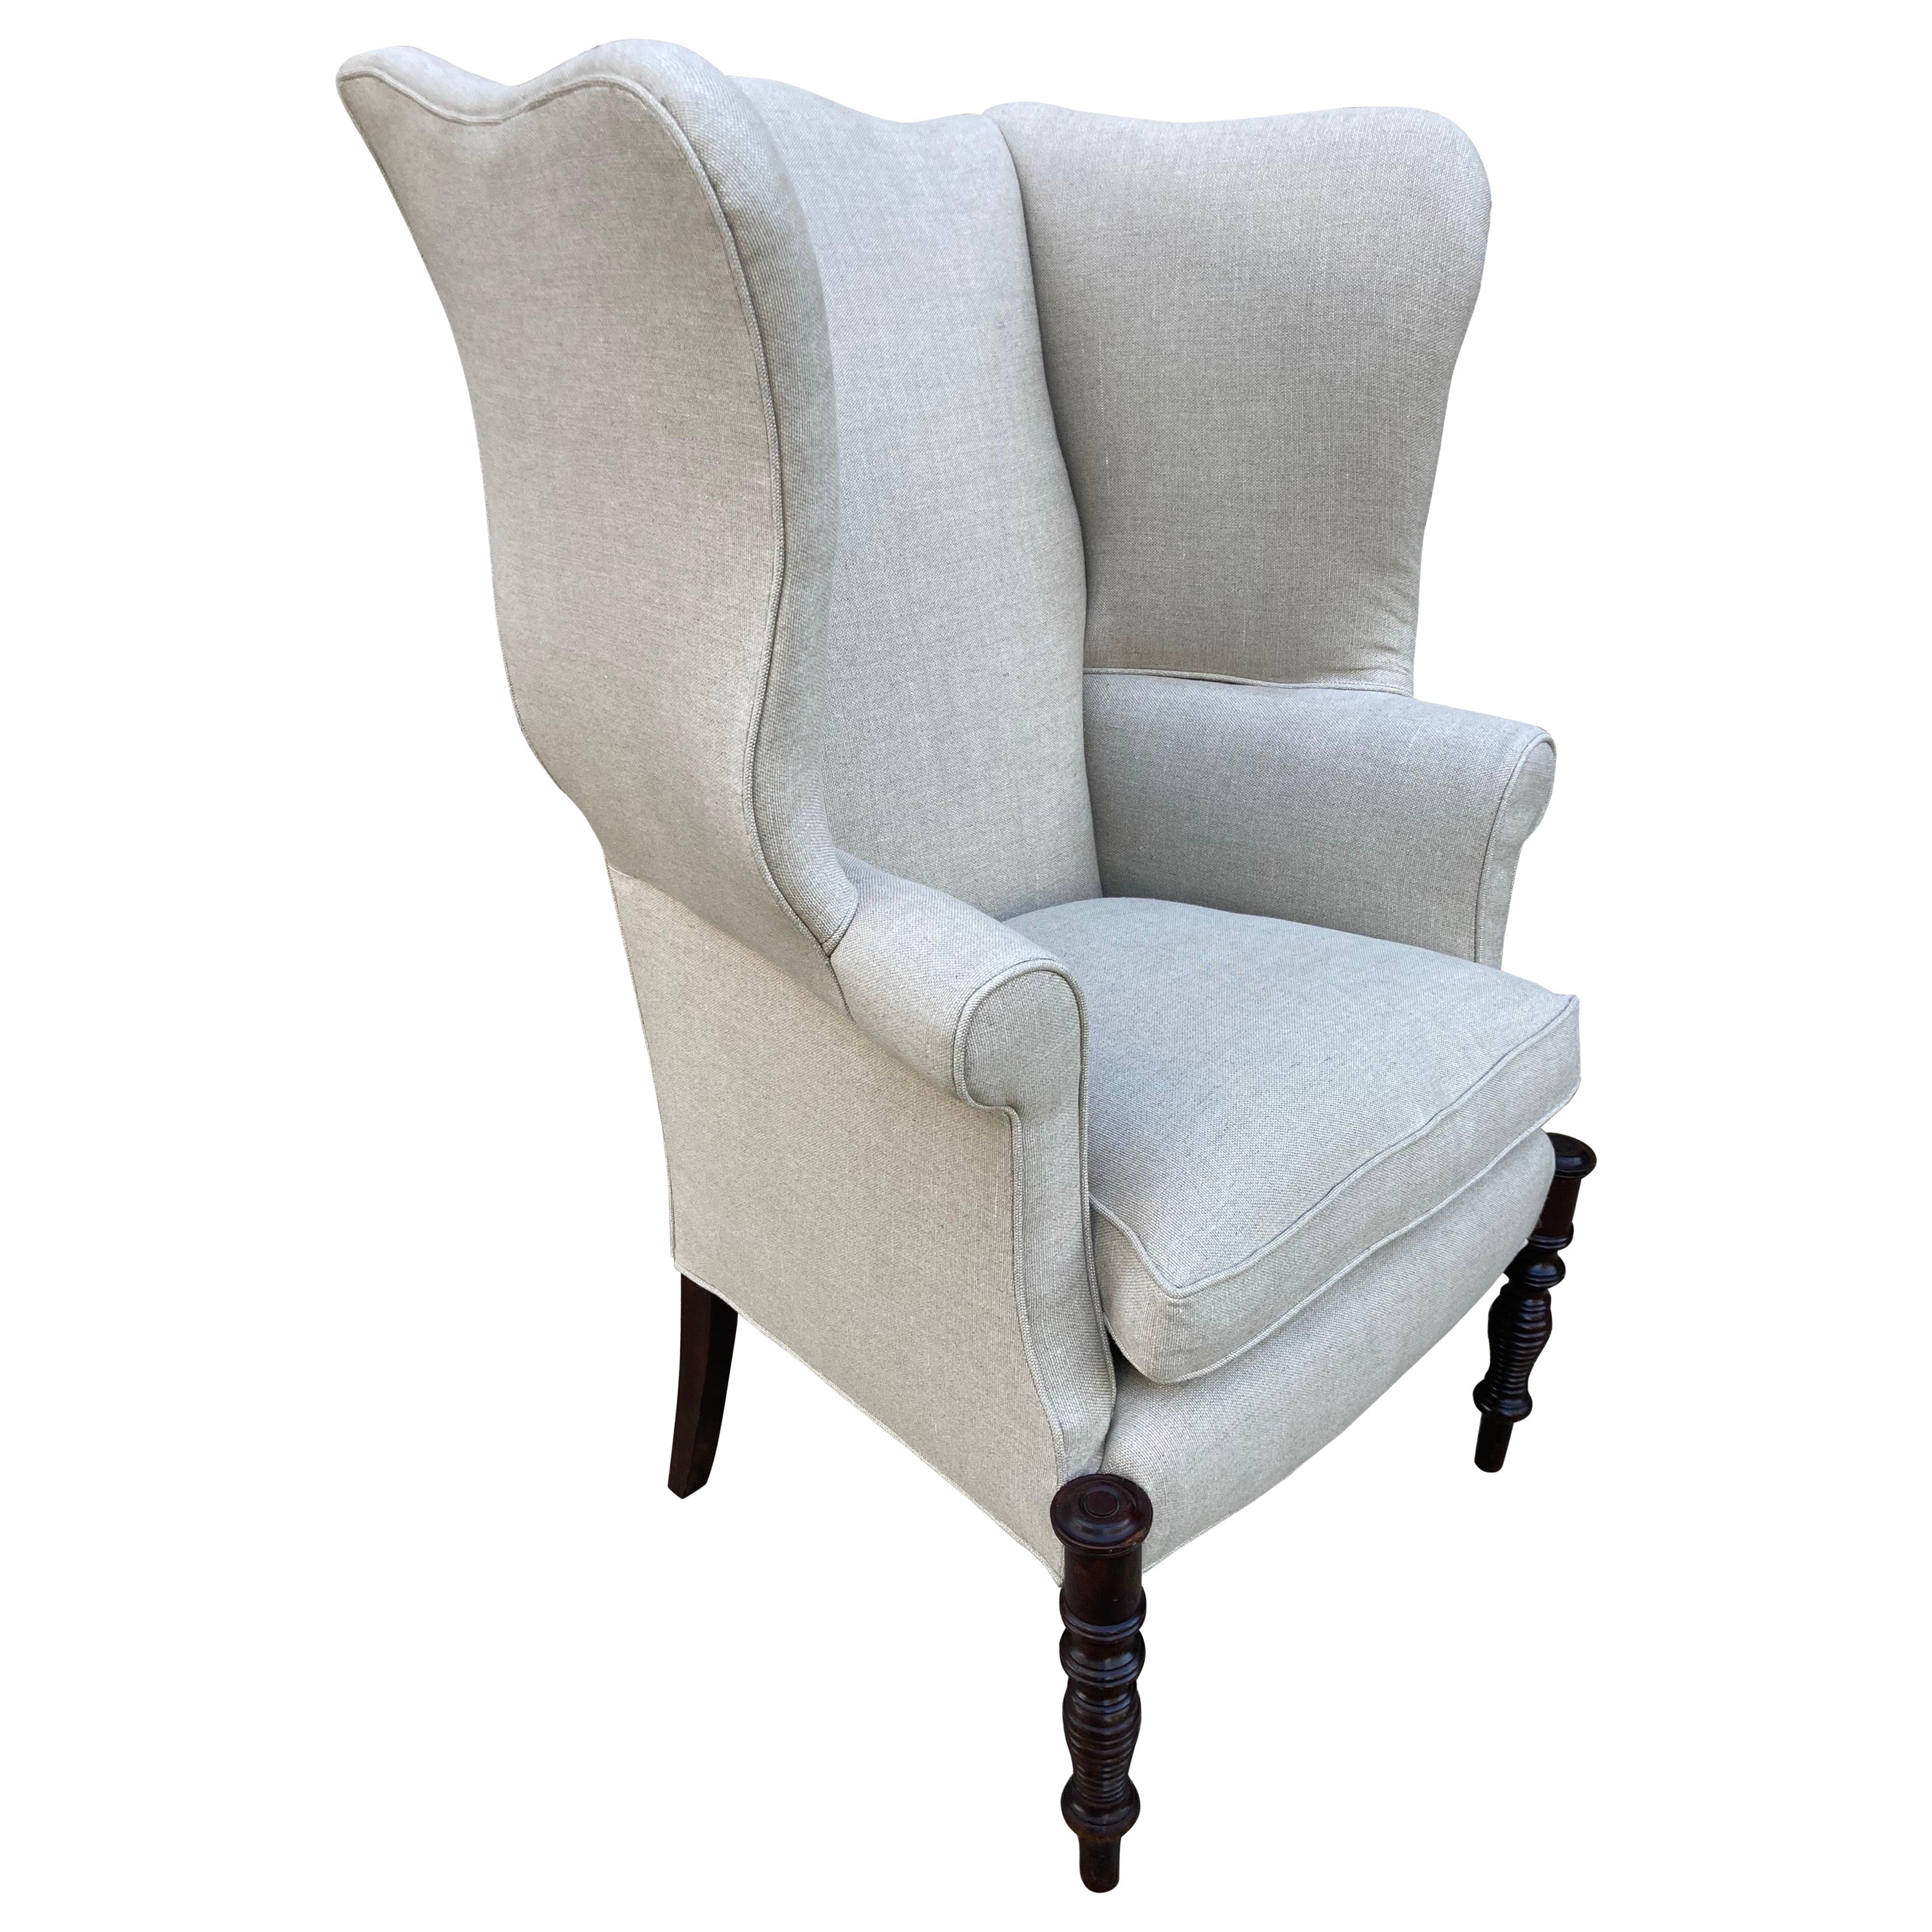 Antique Wingback Chair For Sale